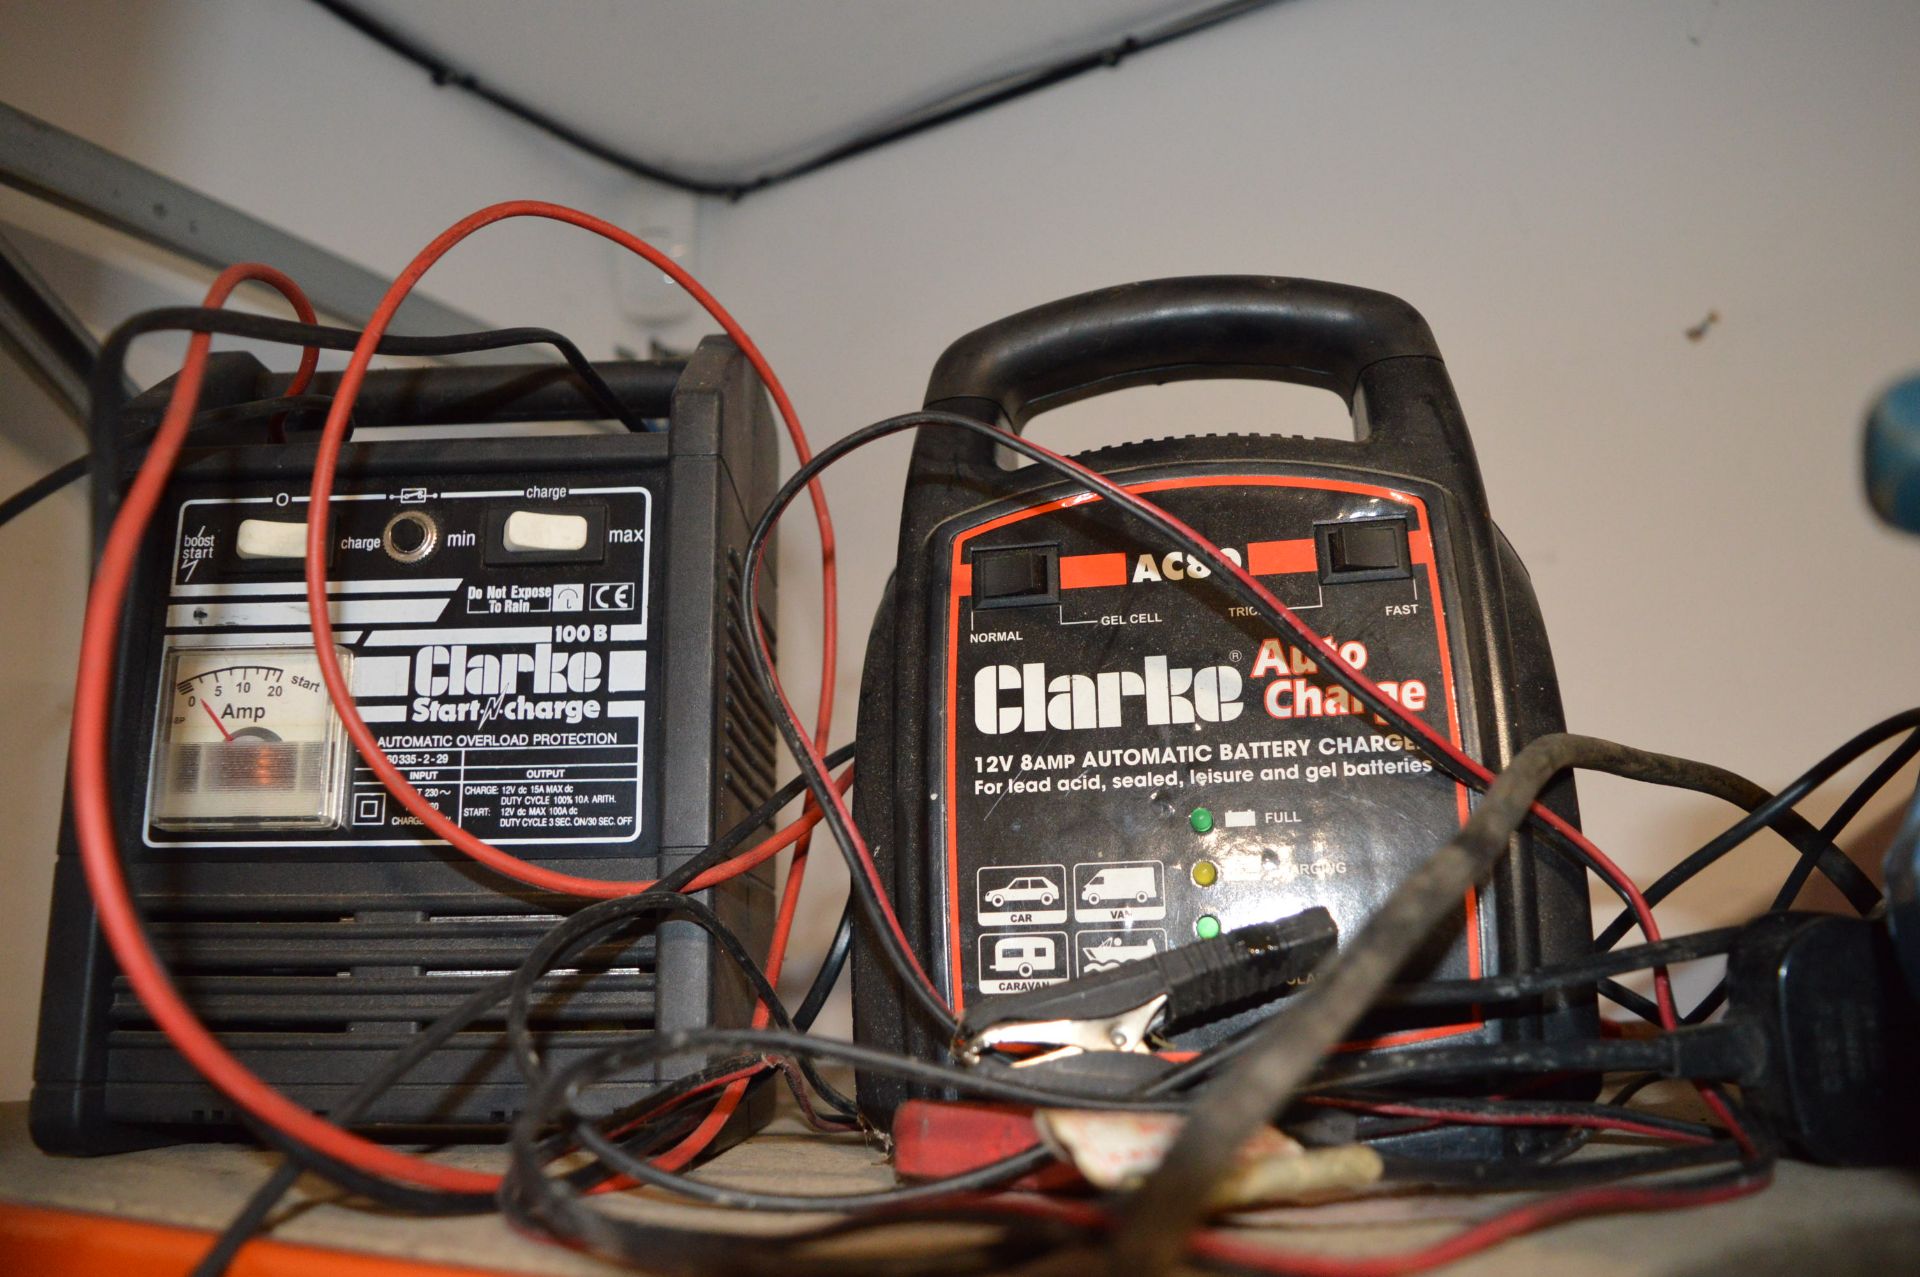 Two Clark Battery Chargers, and a 3-in-1 Light/Pressure Gauge